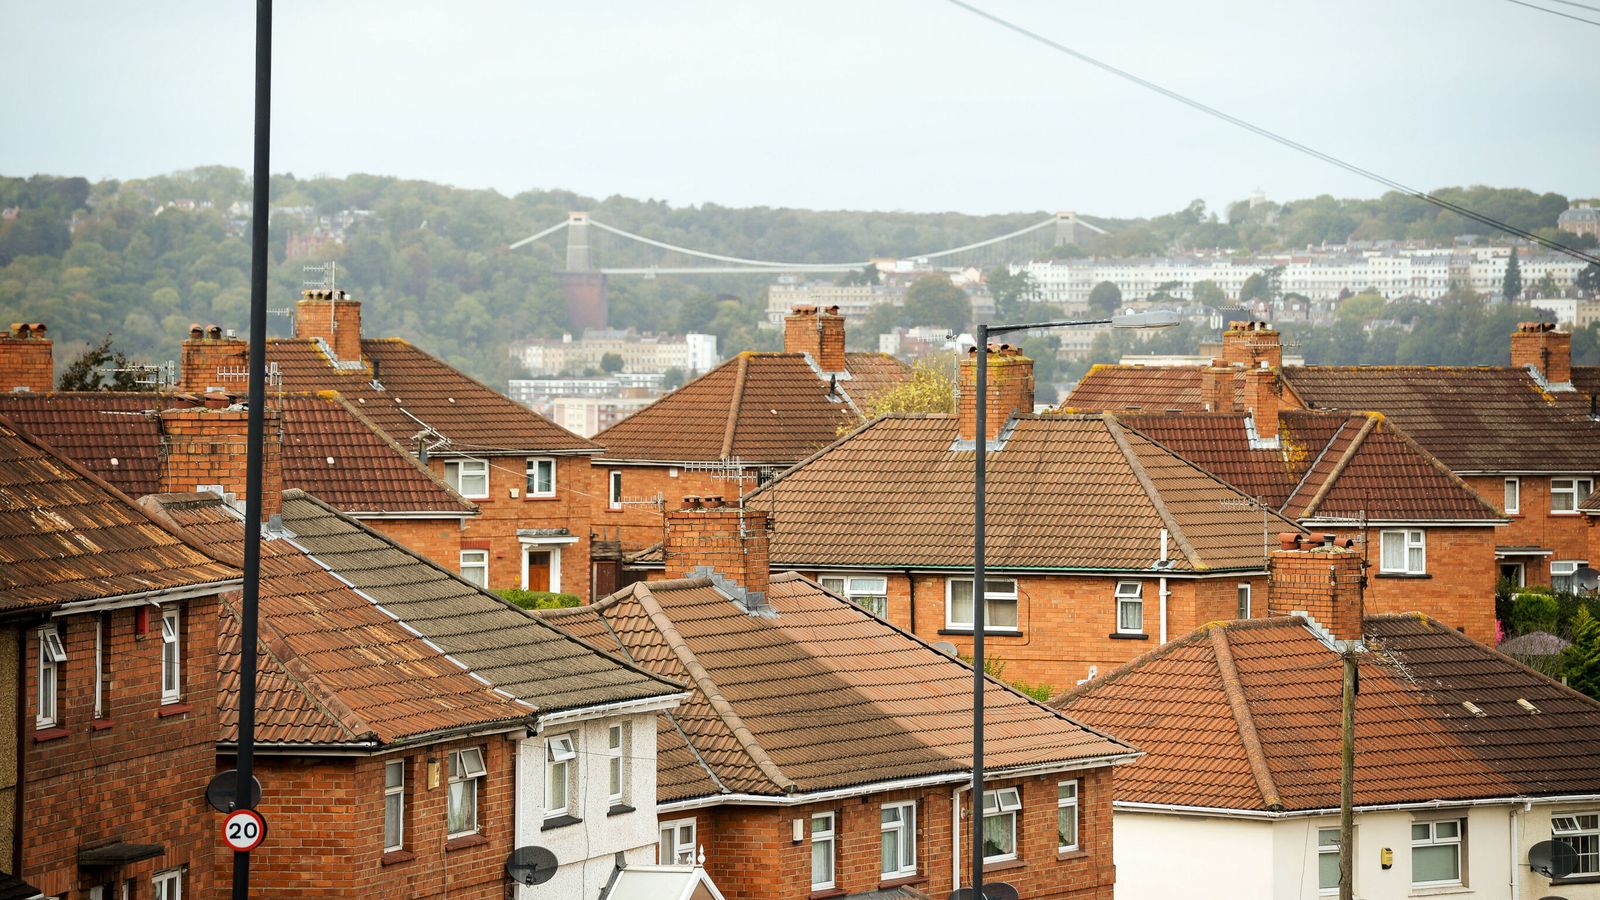 Labour vows to end rental 'bidding wars' - but campaigners say plans only 'tinker at the edges' 